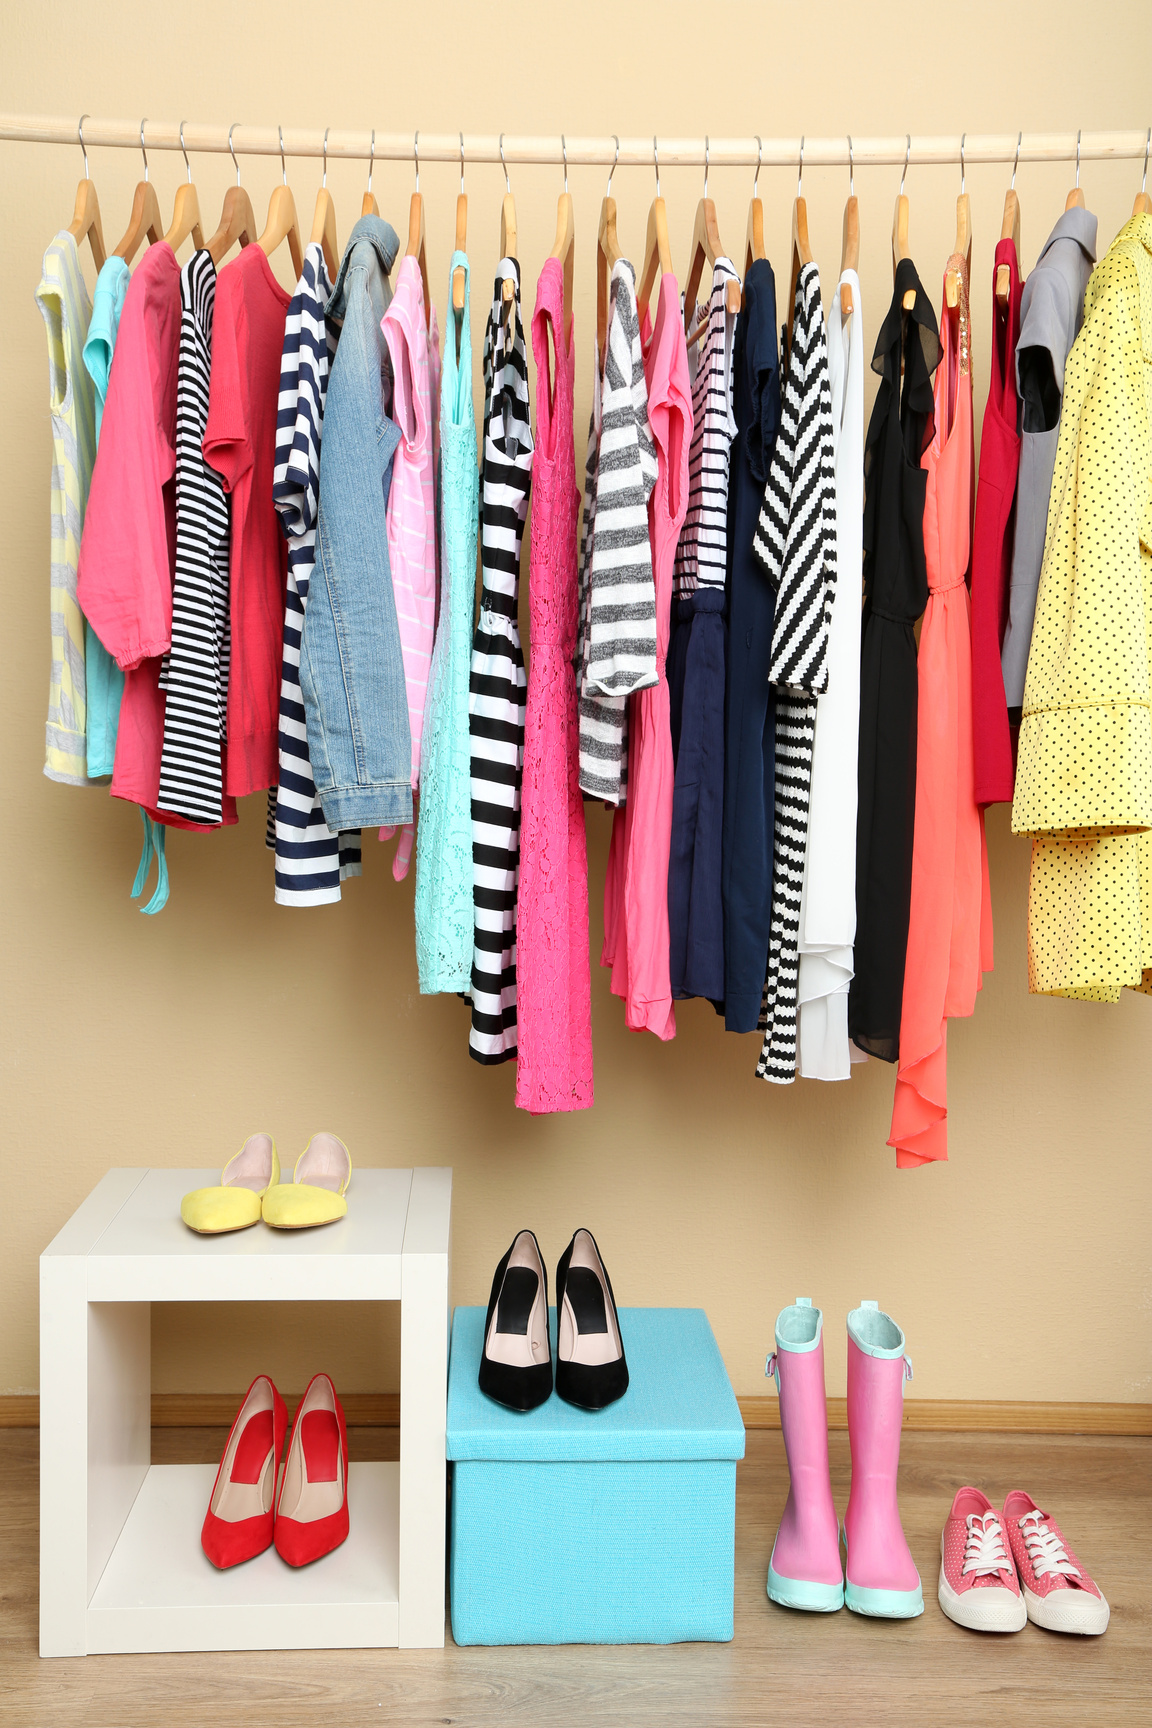 Colorful Clothes and Shoes in Room